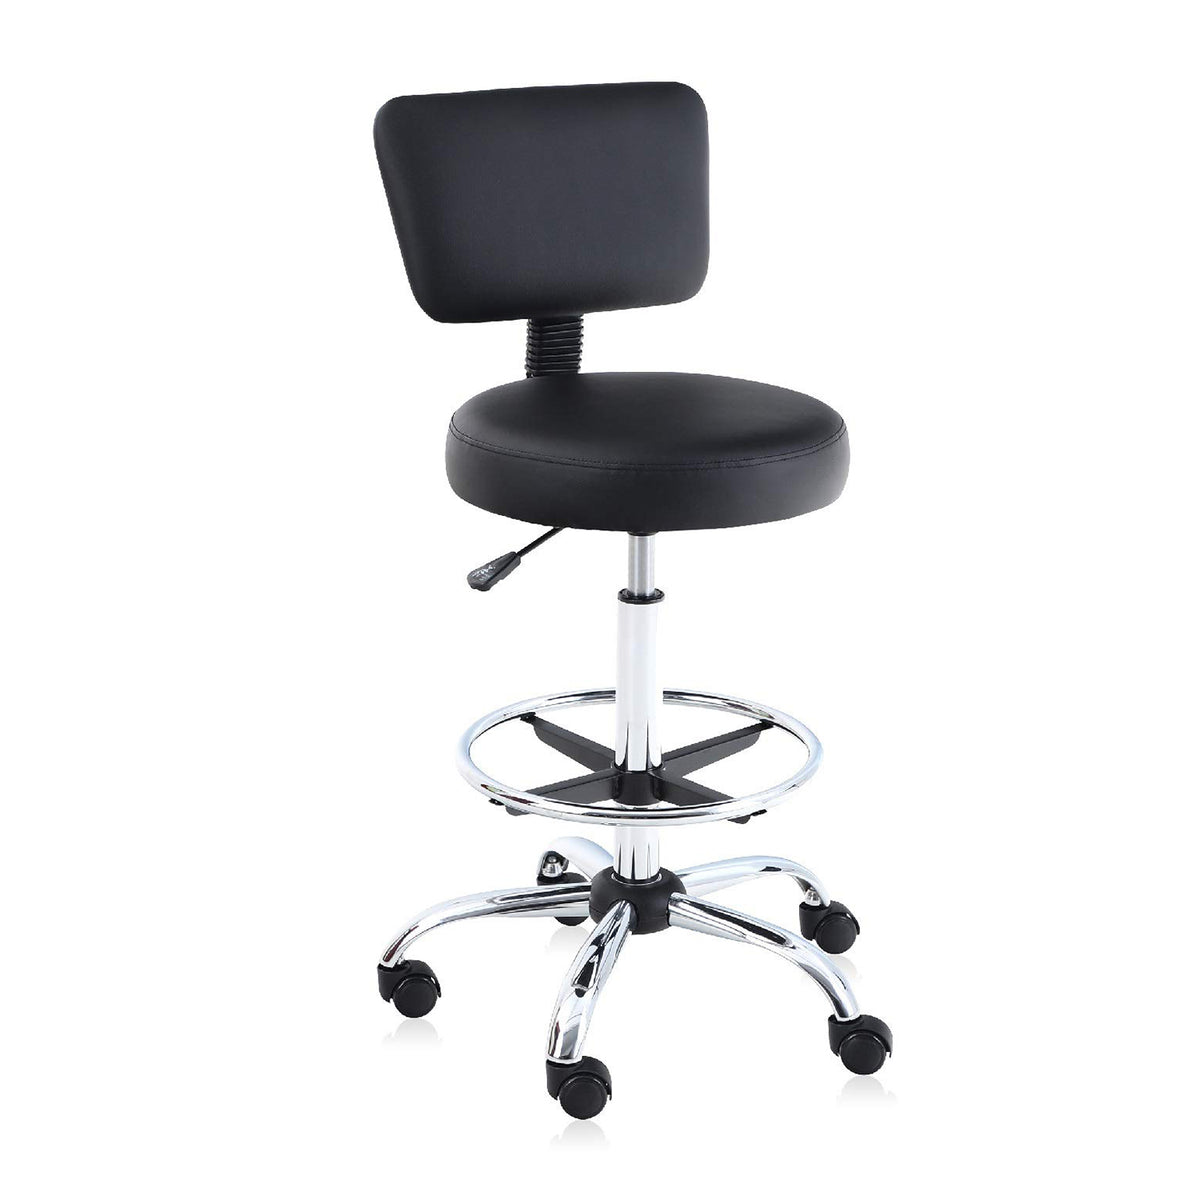 PHI VILLA Adjustable PU Leather Swivel Office Chair with Detachable Backrest